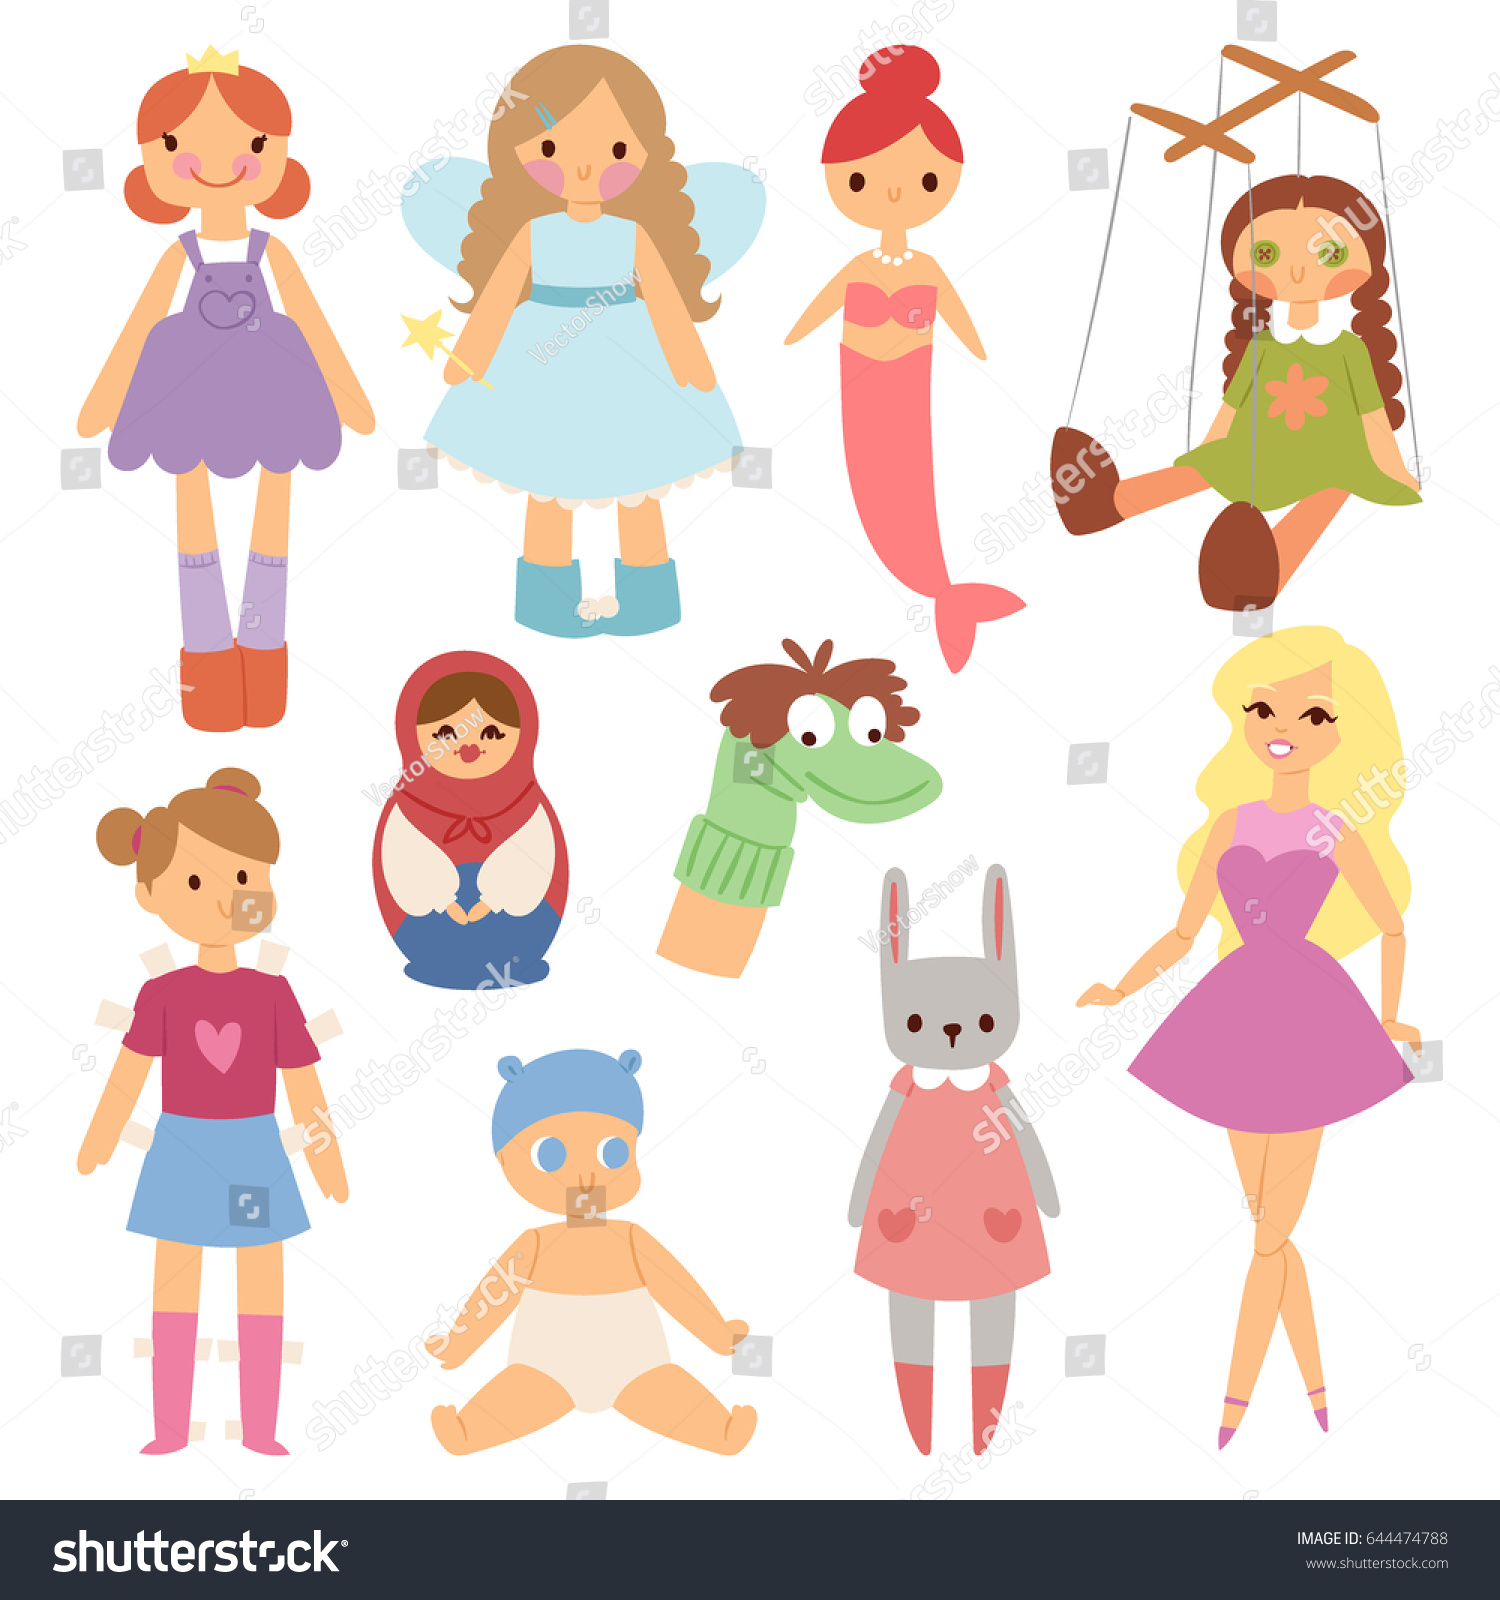 dolls with clip on clothes